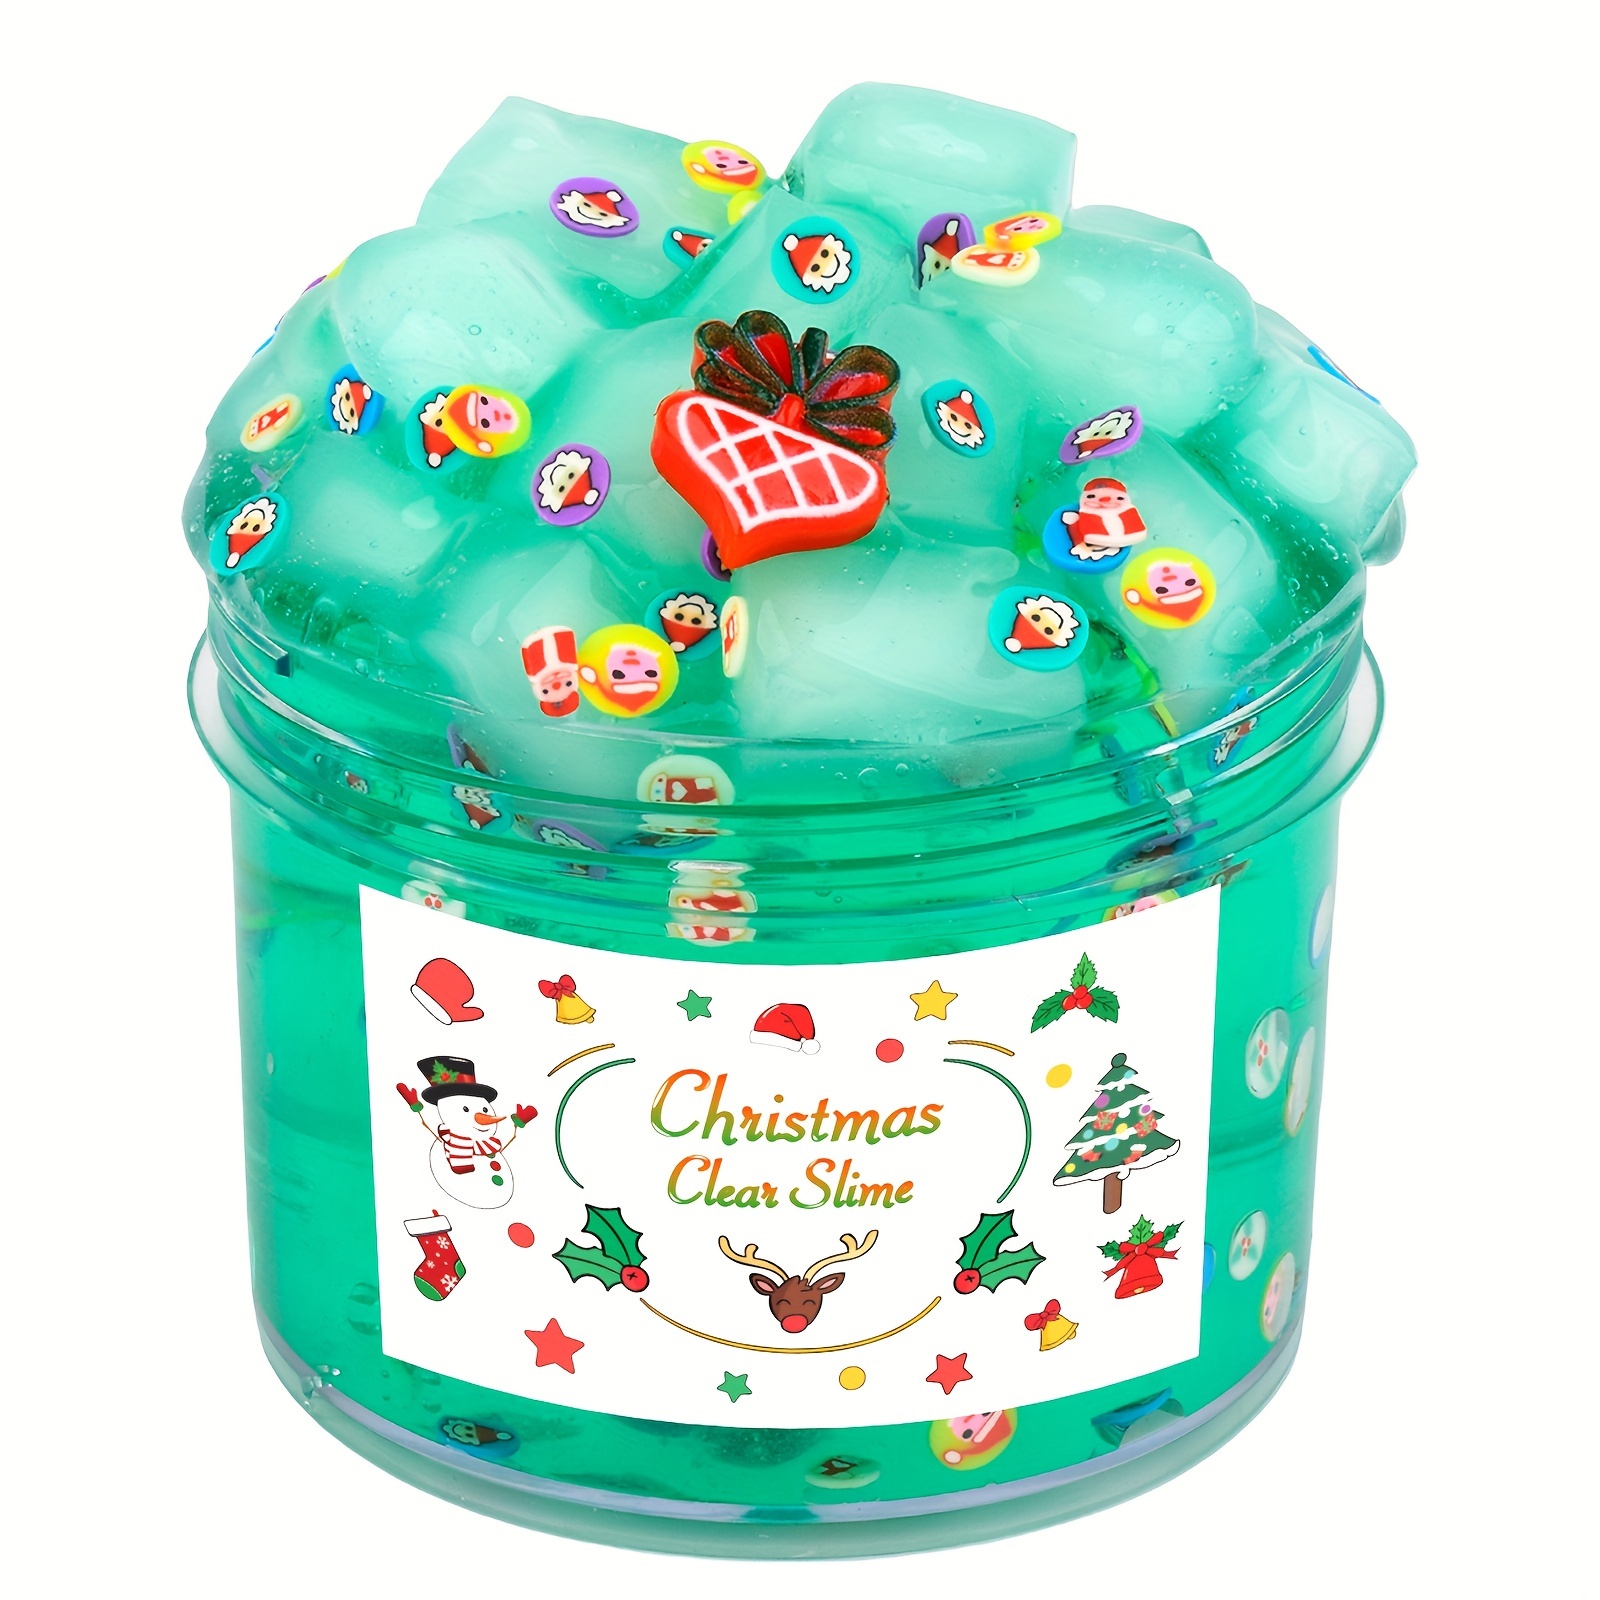 Clear Crystal Mud Slime Clay Non Sticky, Stretchy, And Shimmering DIY Sugar  Jelly Candy Clay For Girls And Boys Perfect For Parties And Gifts 2218 From  Newtoywholesale, $1.49